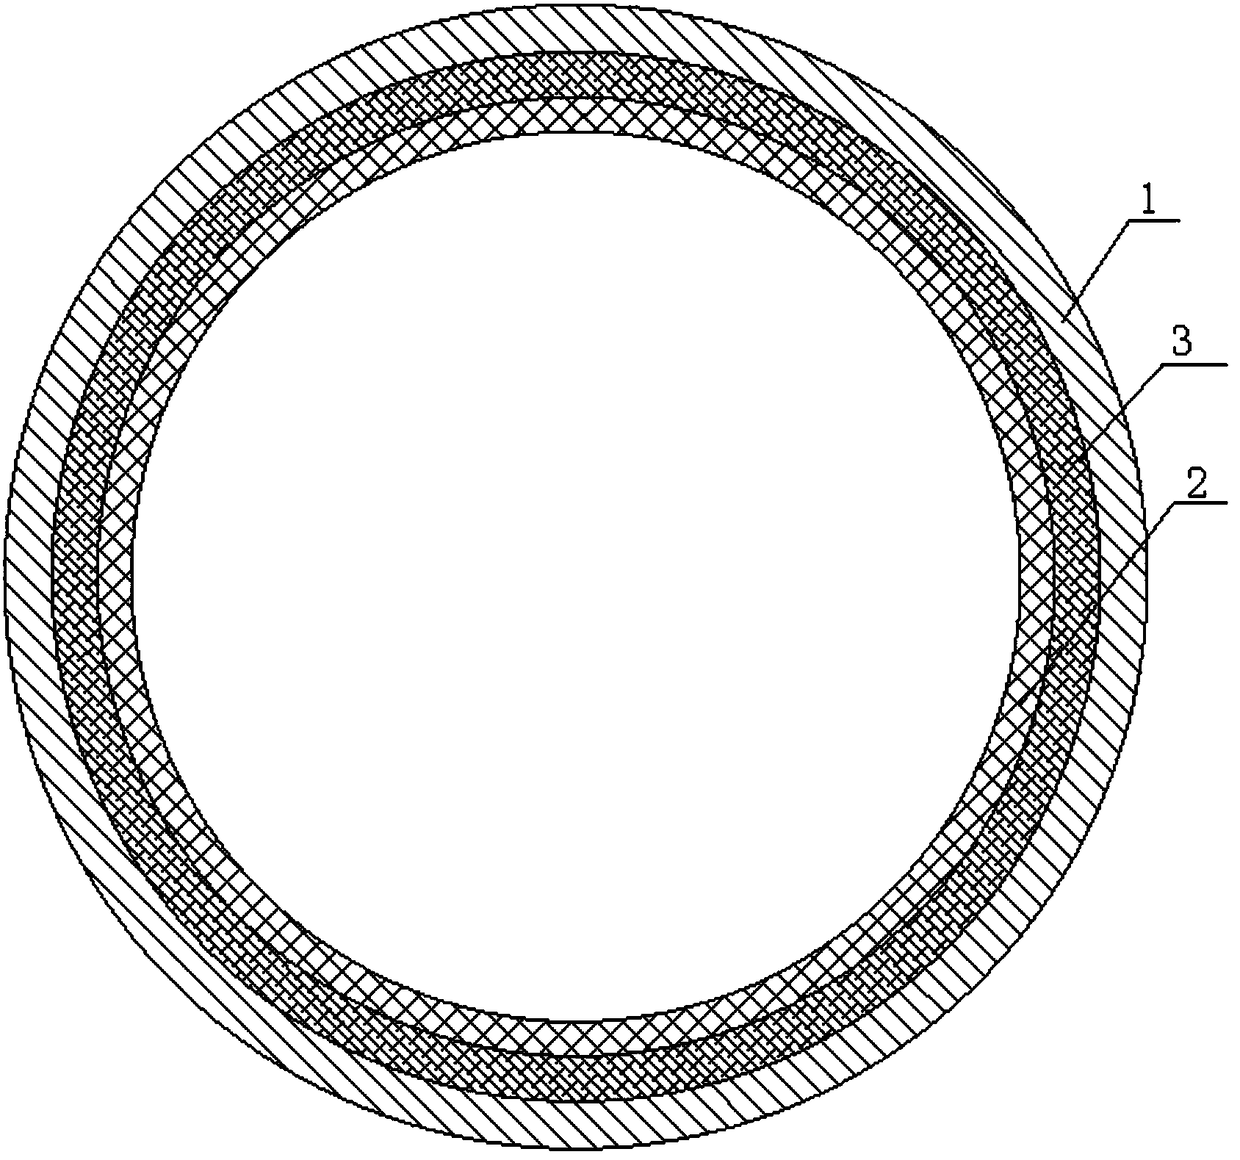 Disposable woven double layer integrated fire hose and manufacture method thereof